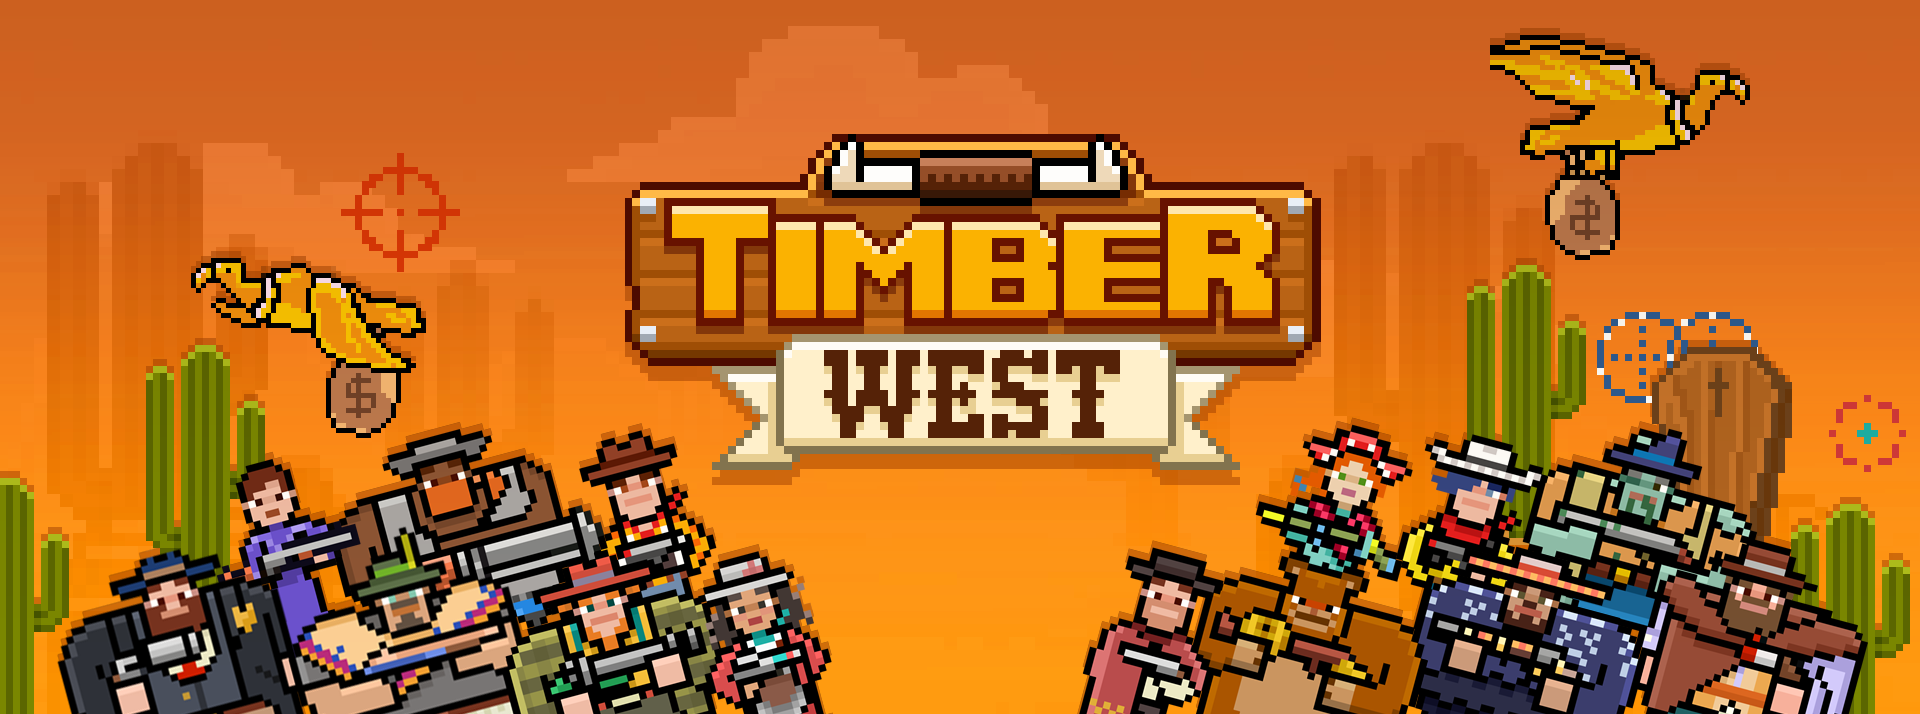 Banner of Timber West - Wild West Arcade Shooter 